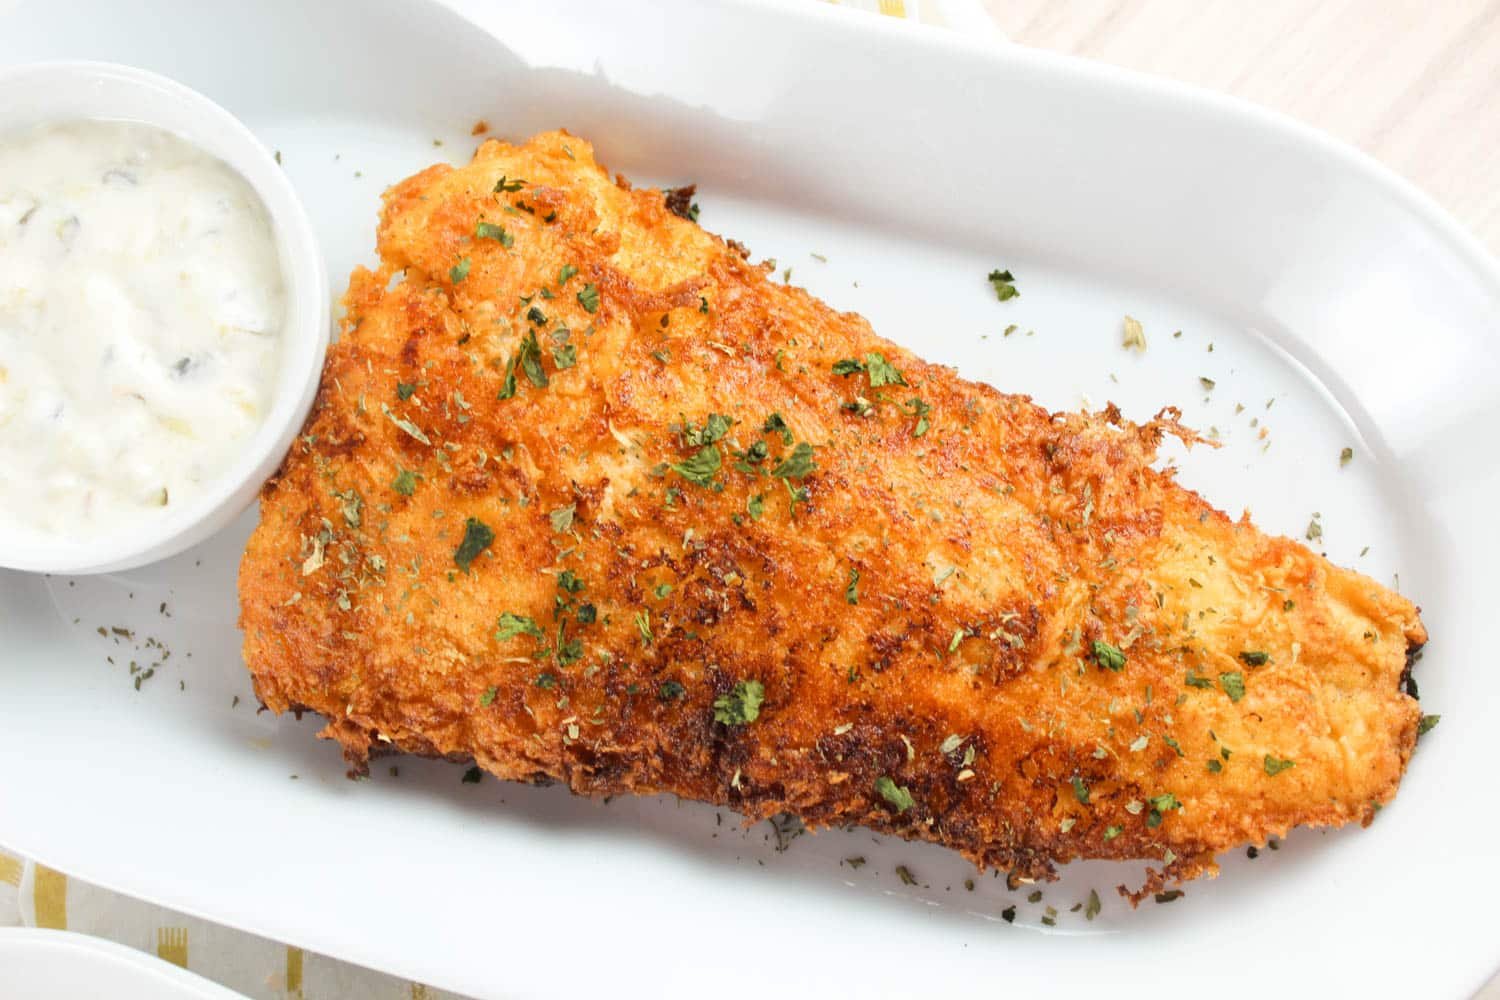 https://www.thefoodhussy.com/wp-content/uploads/2019/09/Frying-Fish-in-Olive-Oil-8.jpg